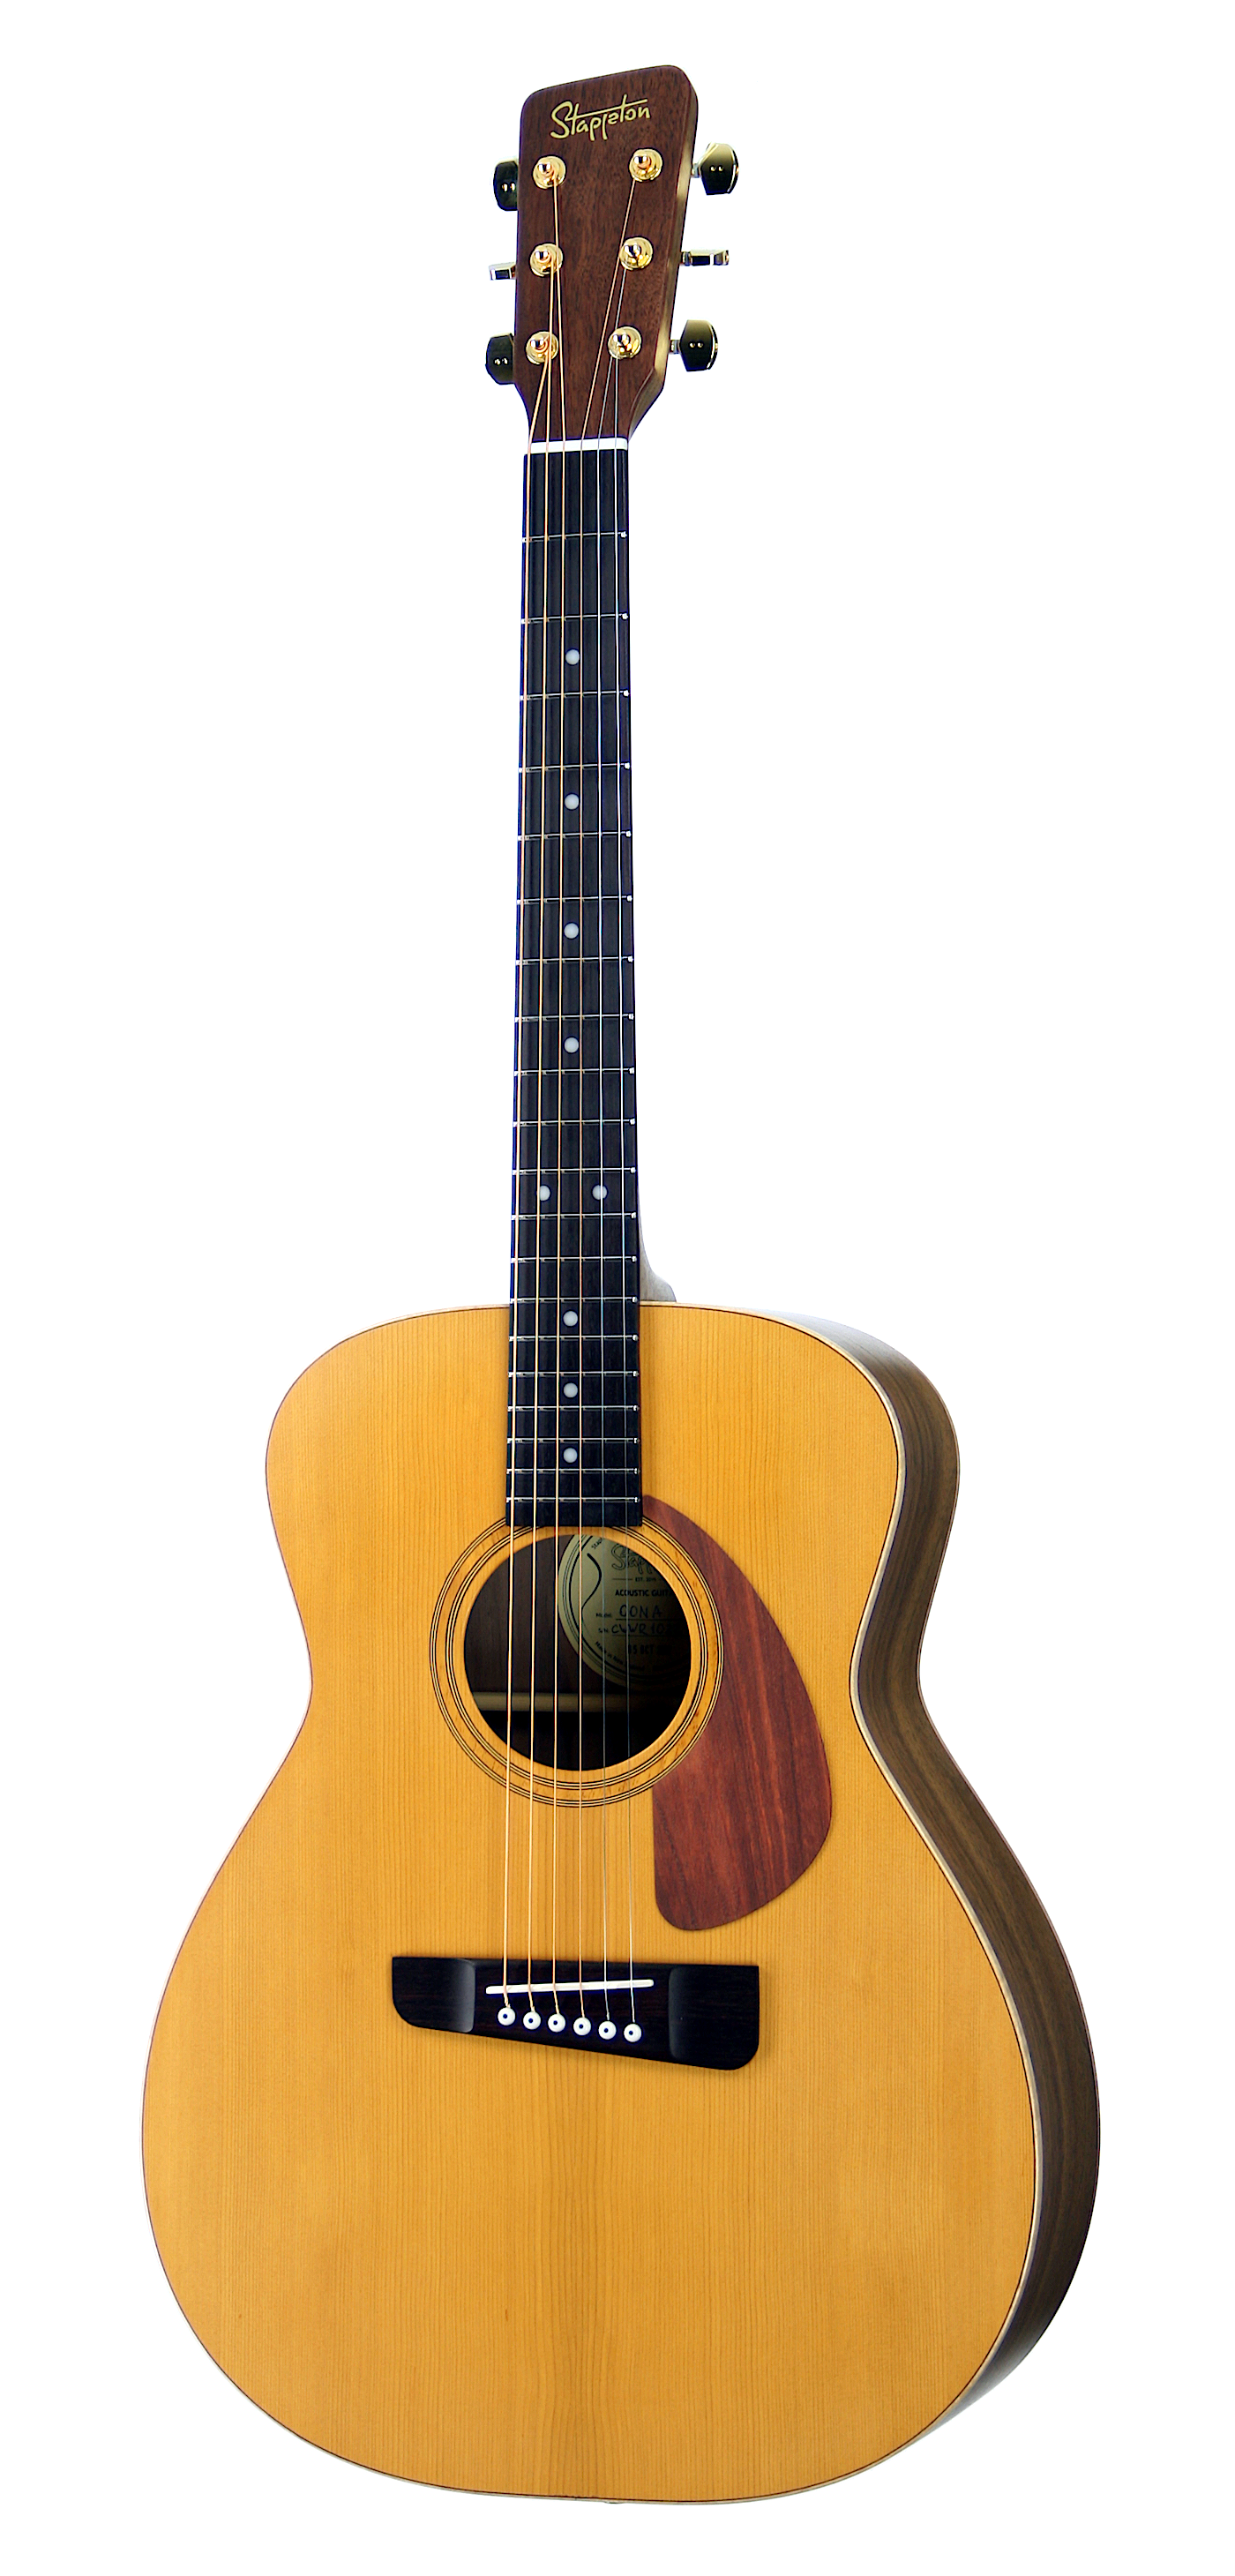 OONA™ Grand Performance, solid wood acoustic guitar. Red cedar soundboard, black walnut neck and body